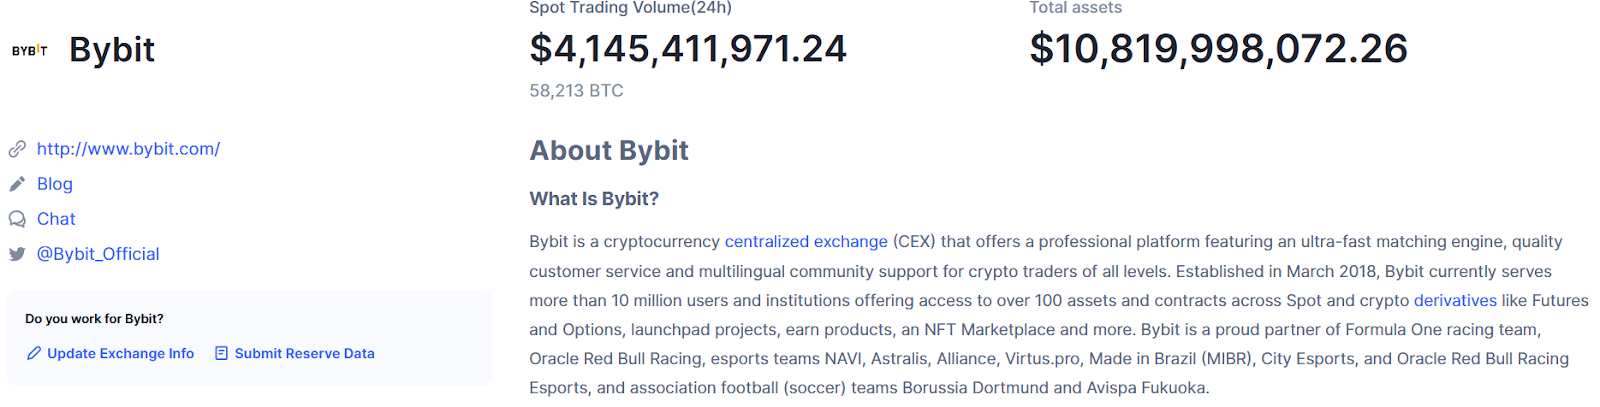 Bybit’s spot trading volume in the last 24 hours